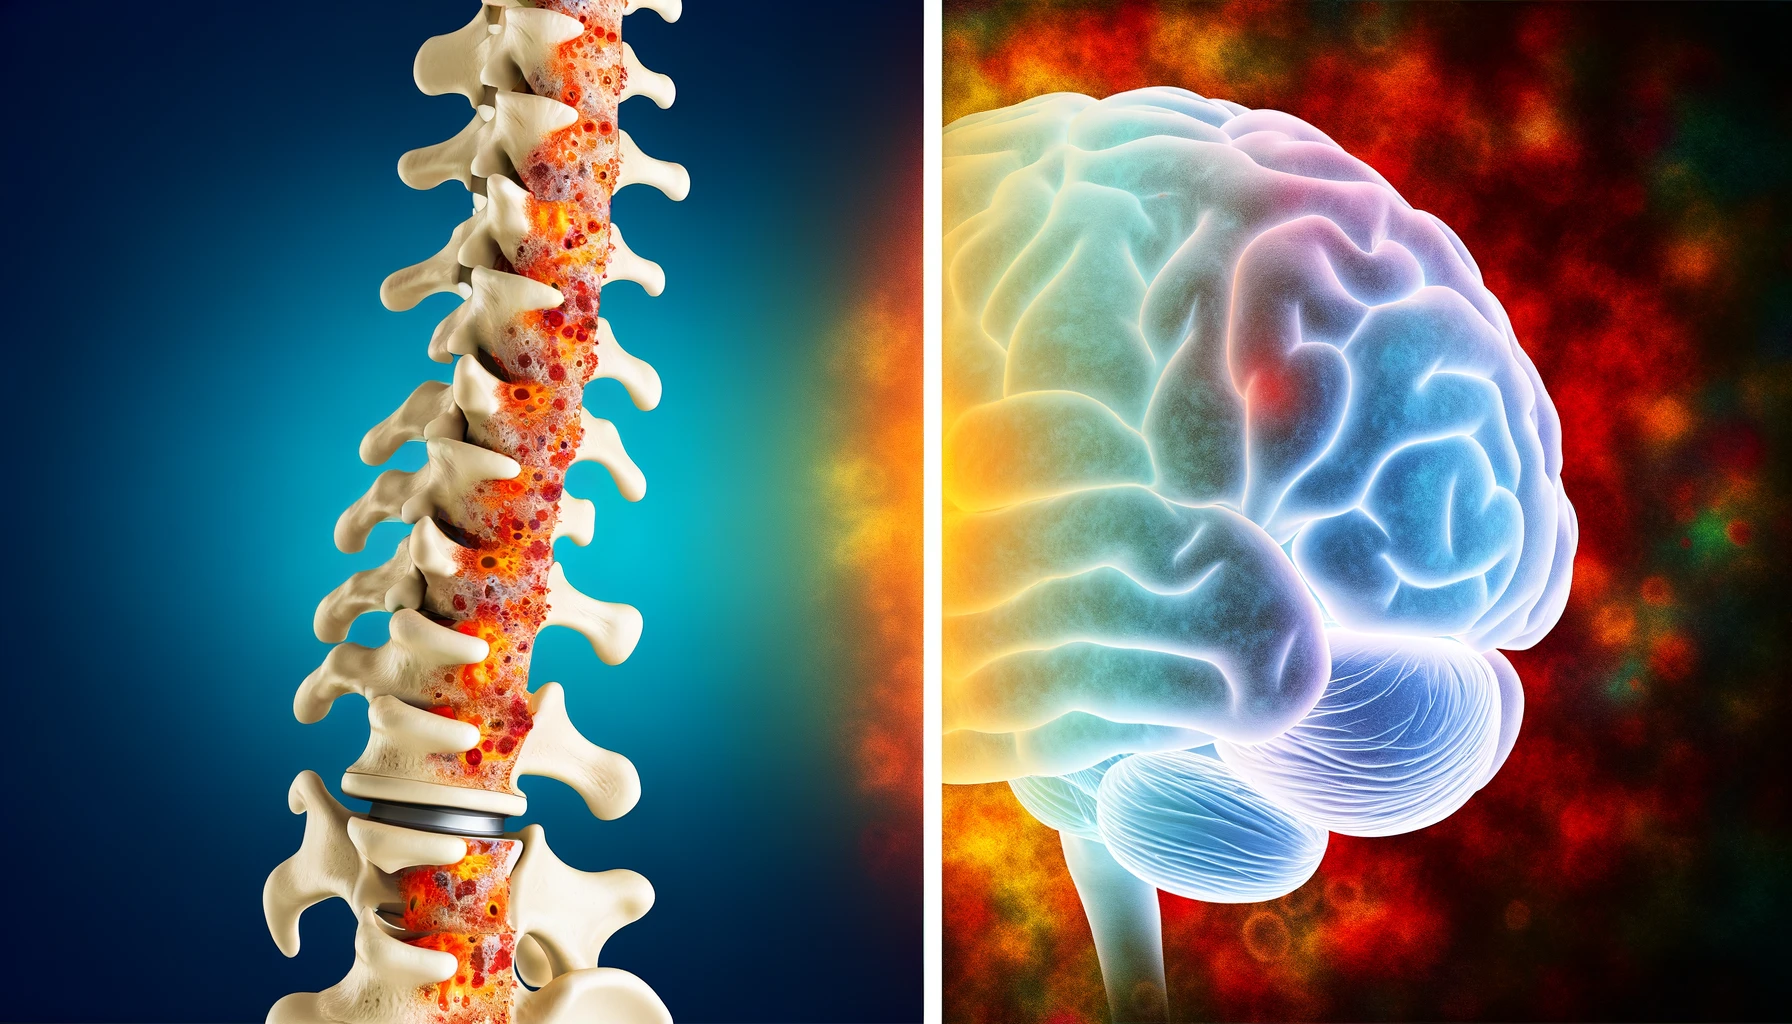 Featured image for “Is Endplate Sclerosis the same as Multiple Sclerosis?”